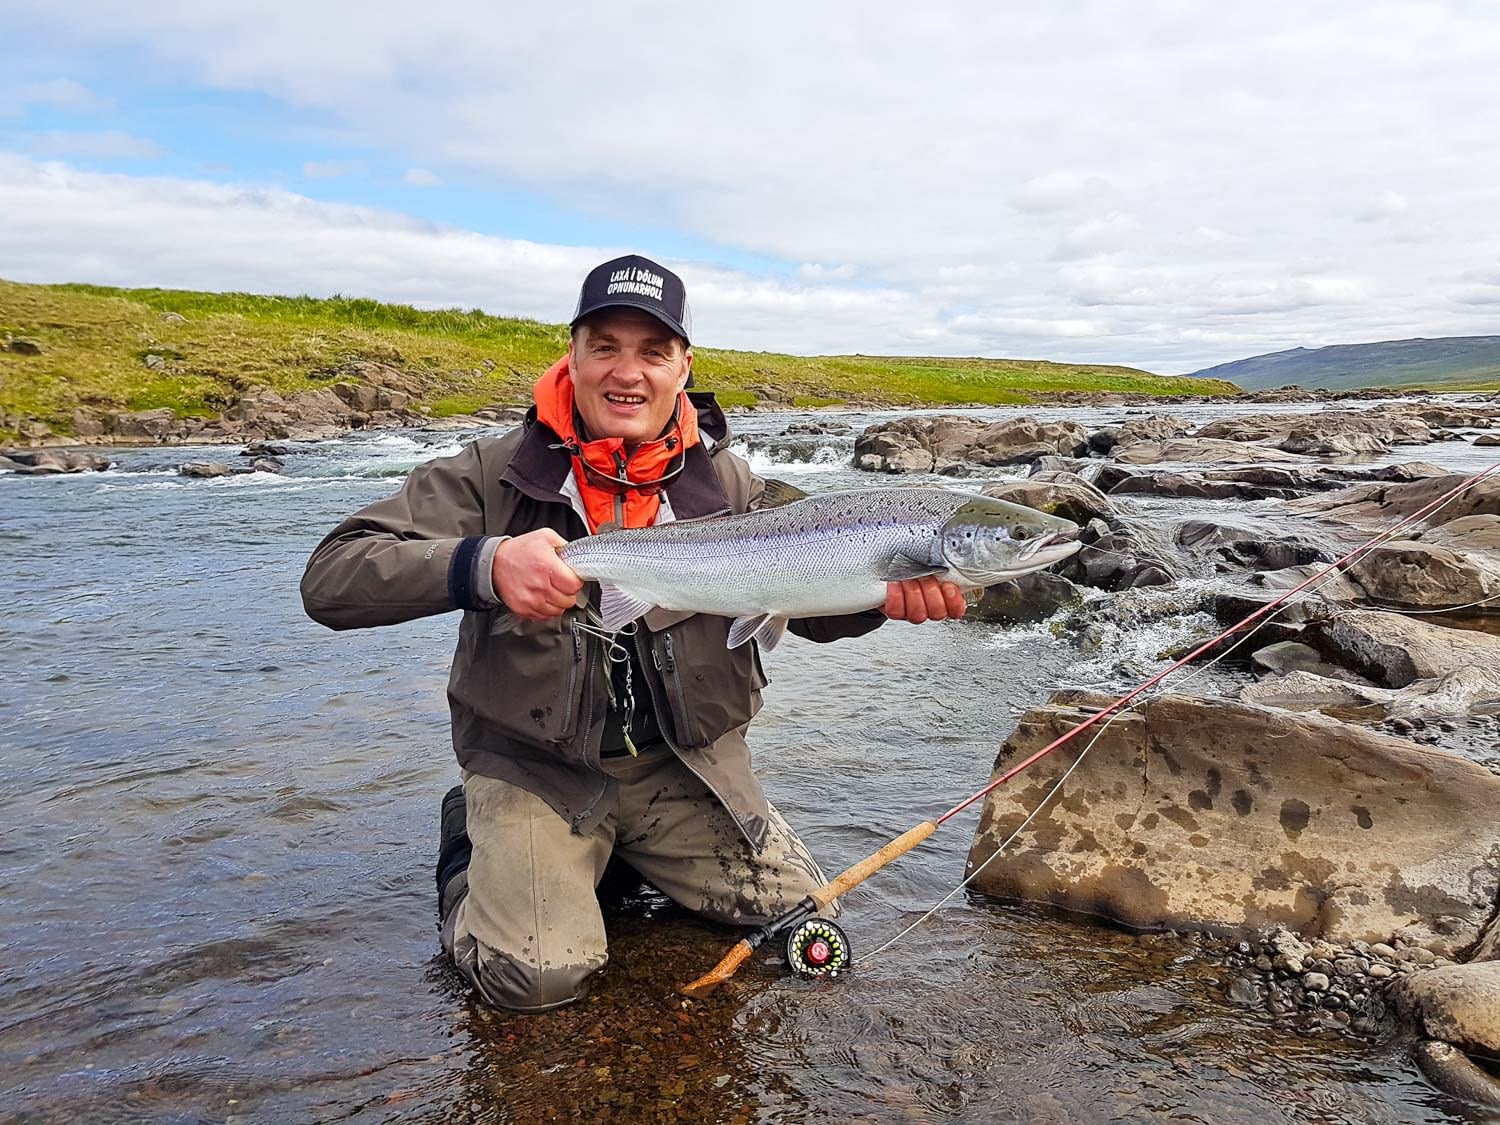 Laxa in Dolum offers some of the best fishing in the region